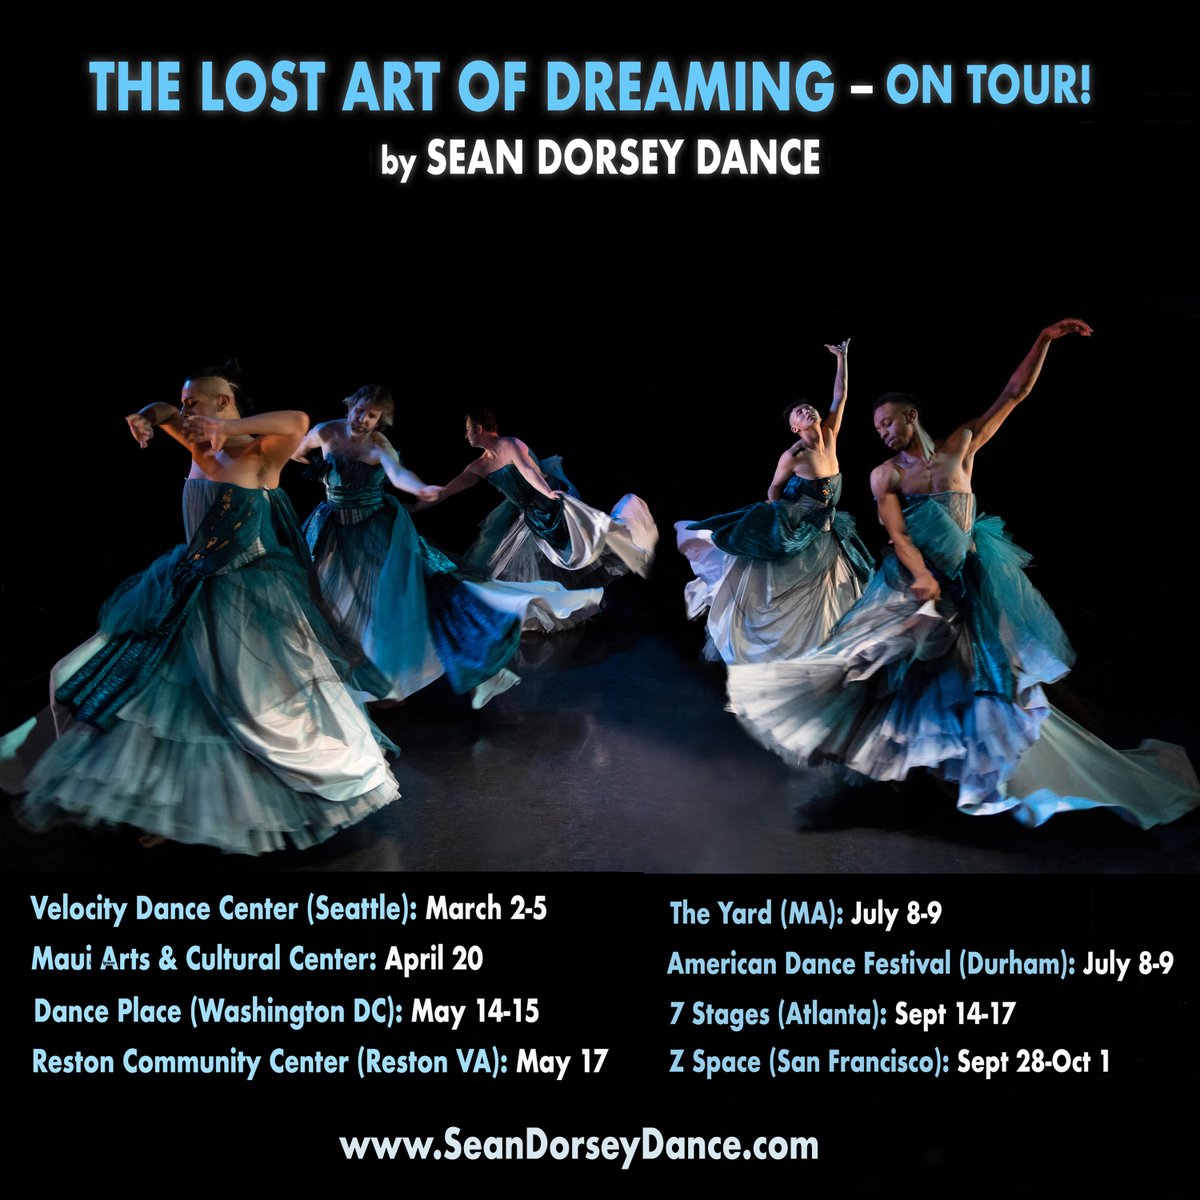 YES! @SeanDorseyDance is going on tour with their gorgeous new work #TheLostArtOfDreaming! ✨🌒 #trans #queer #dance #futures #TRANSformDance